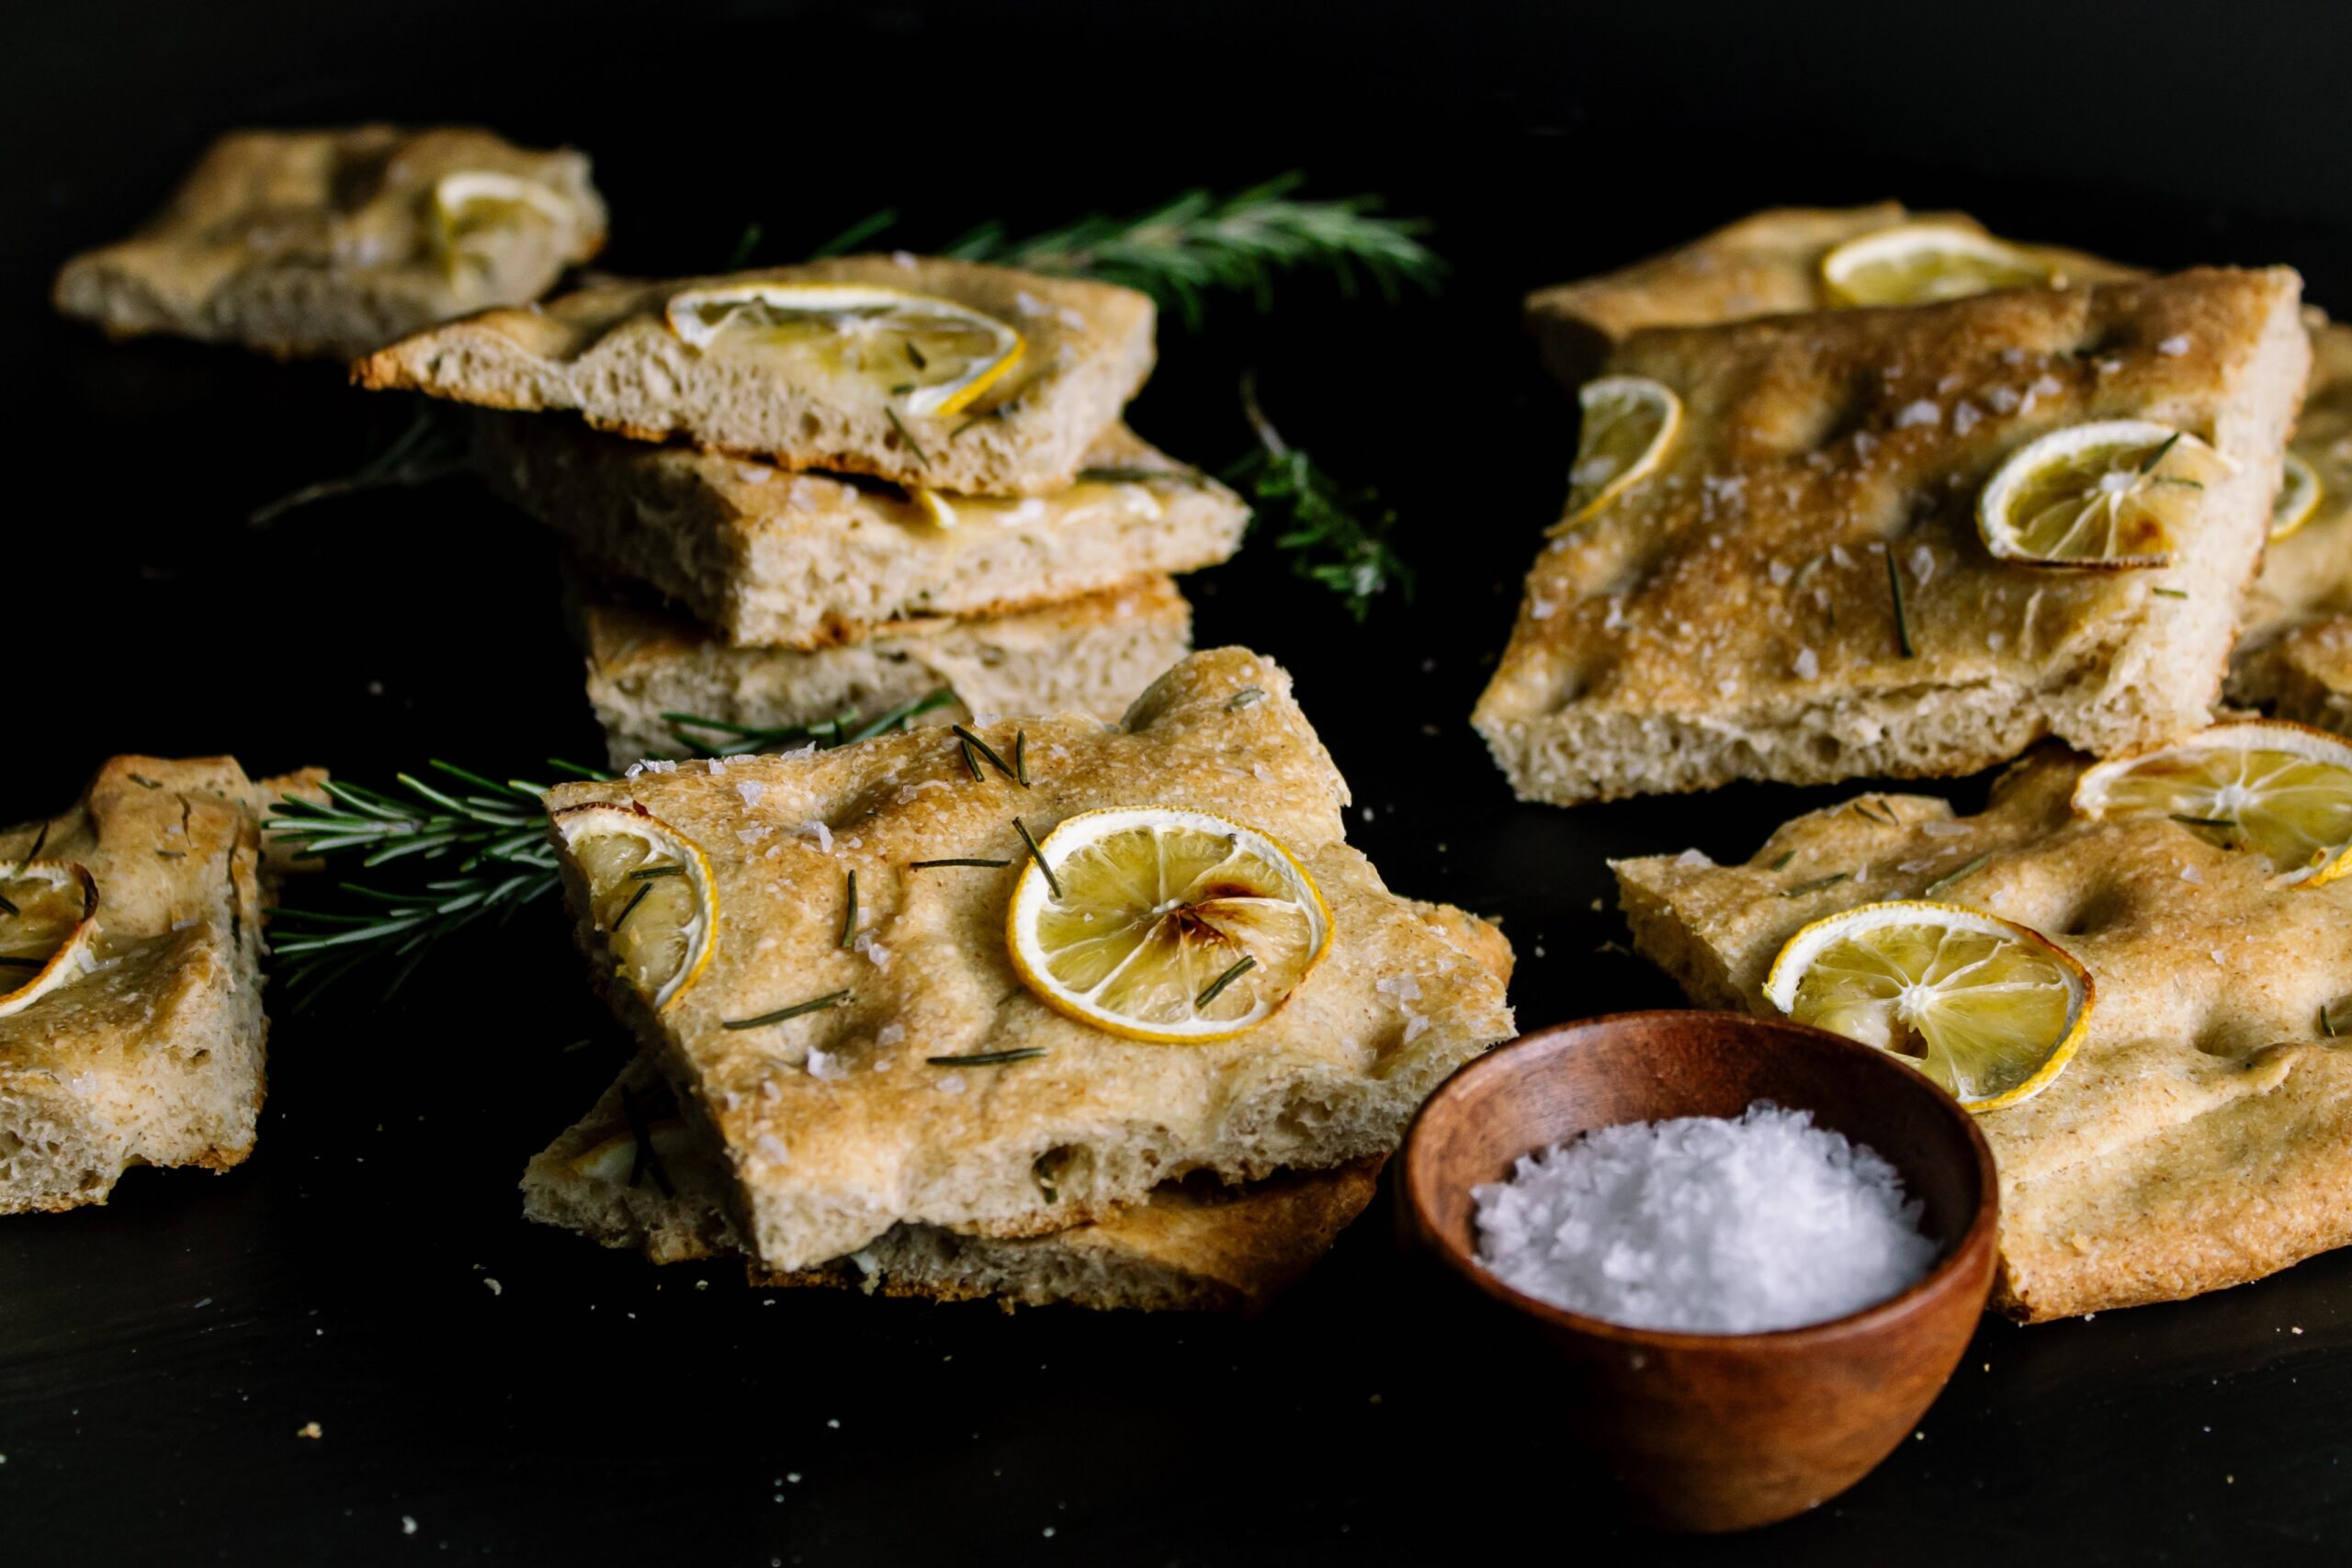 Garlic and Rosemary Focaccia, a great bread to accompany all your dishes.